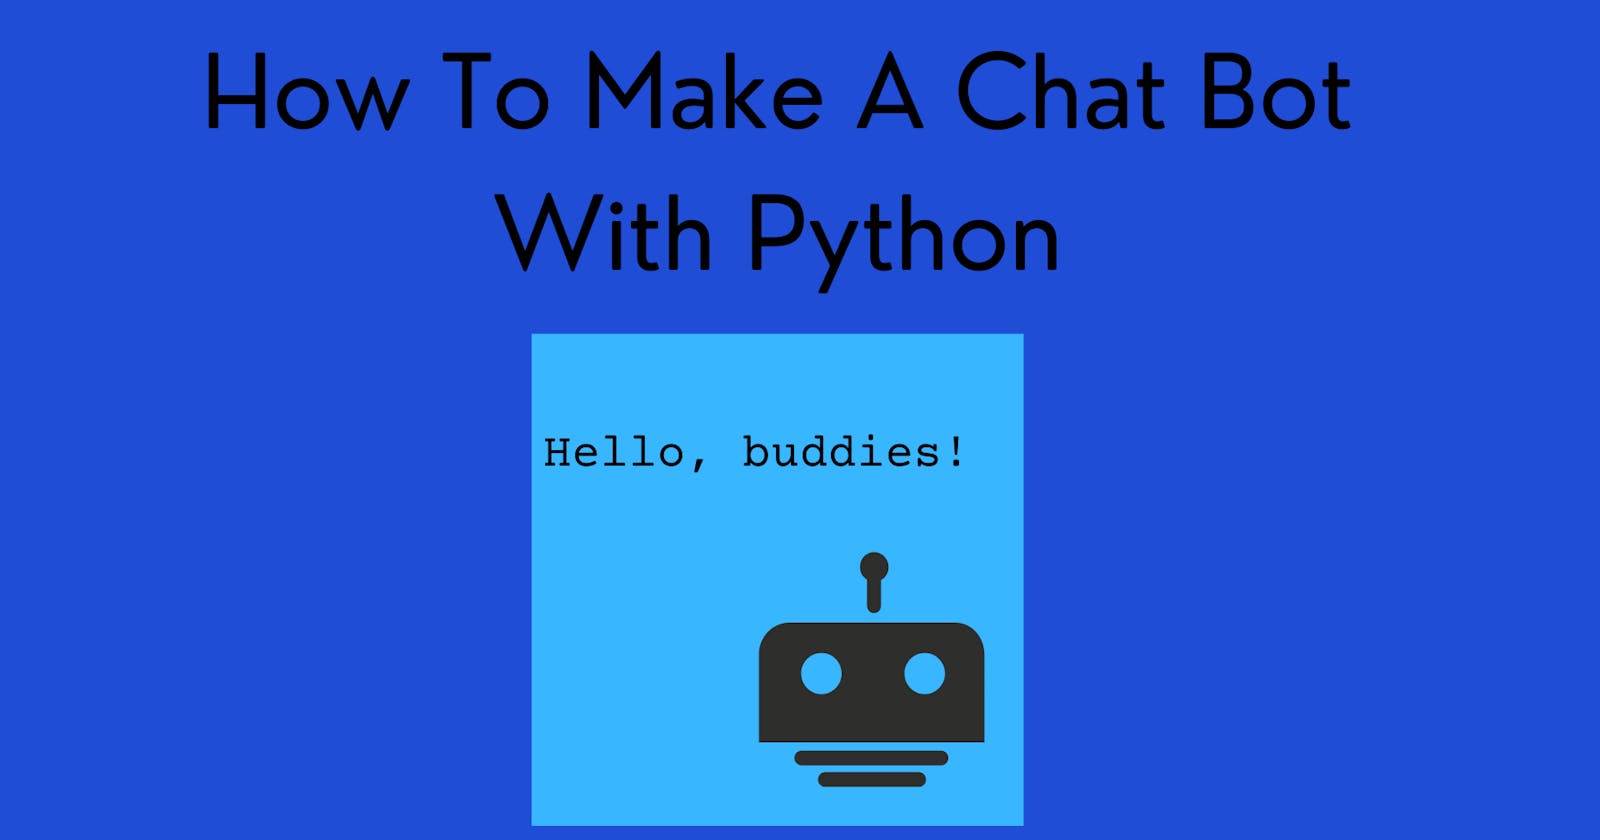 How To Make A Chat Bot With Python